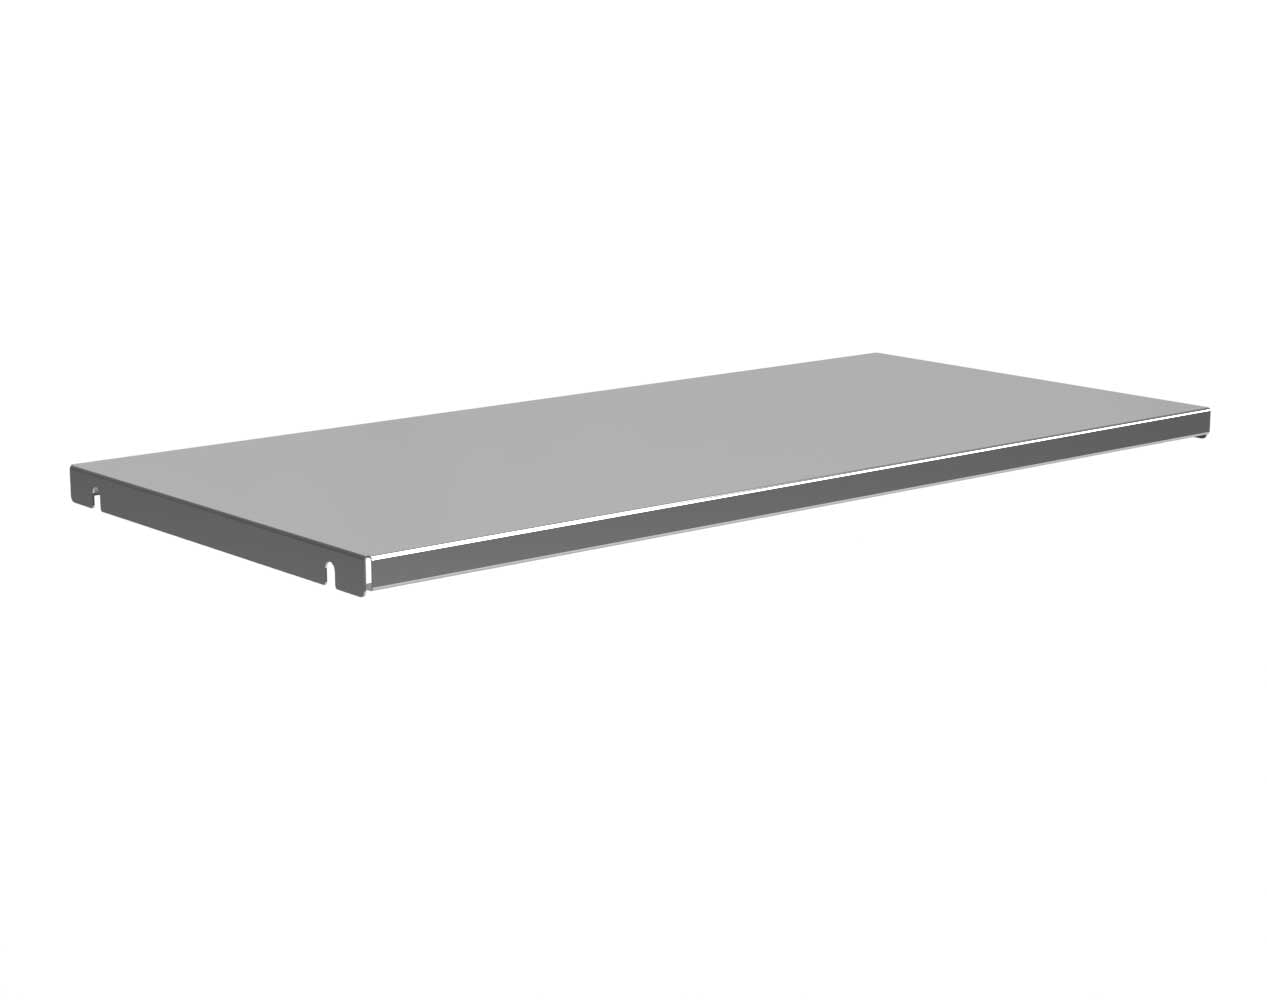 Stainless Steel Adjustable Shelf for 48 in. W x 24 in. D Cabinet